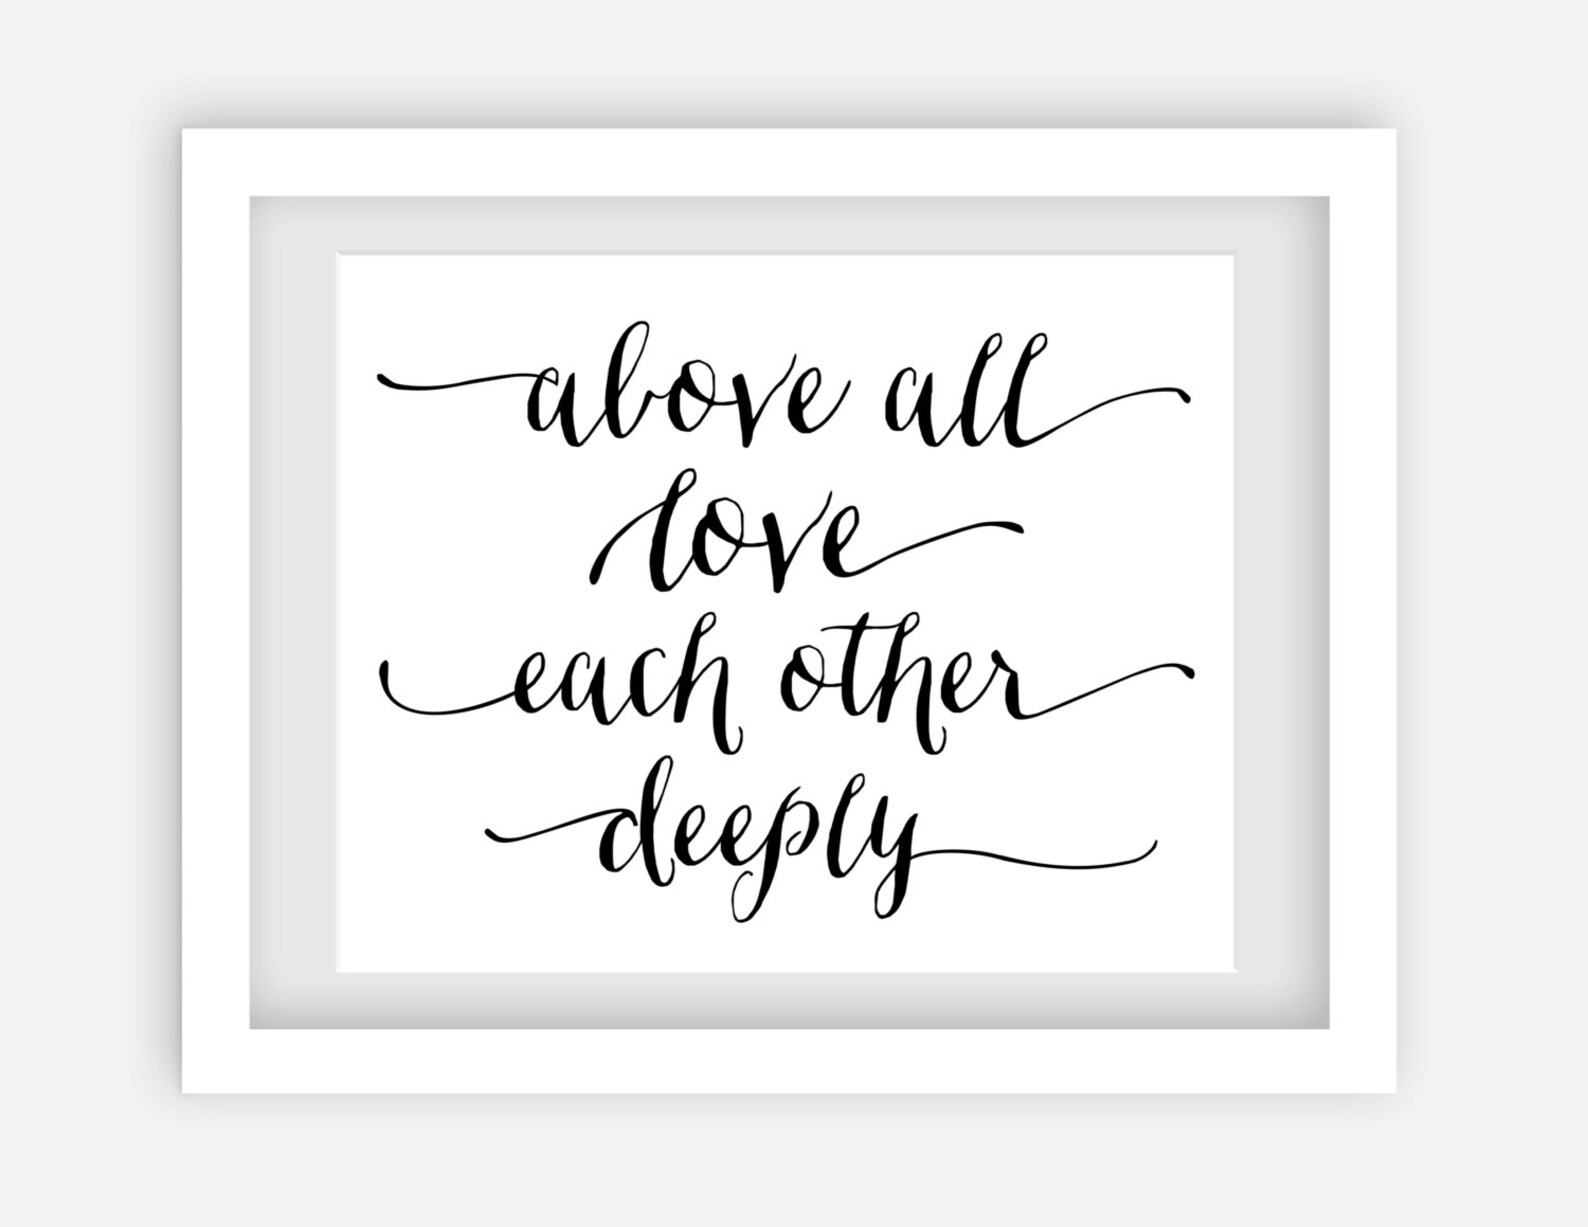 Above All Love Each Other Deeply. 8x10 Printable Art. - Etsy